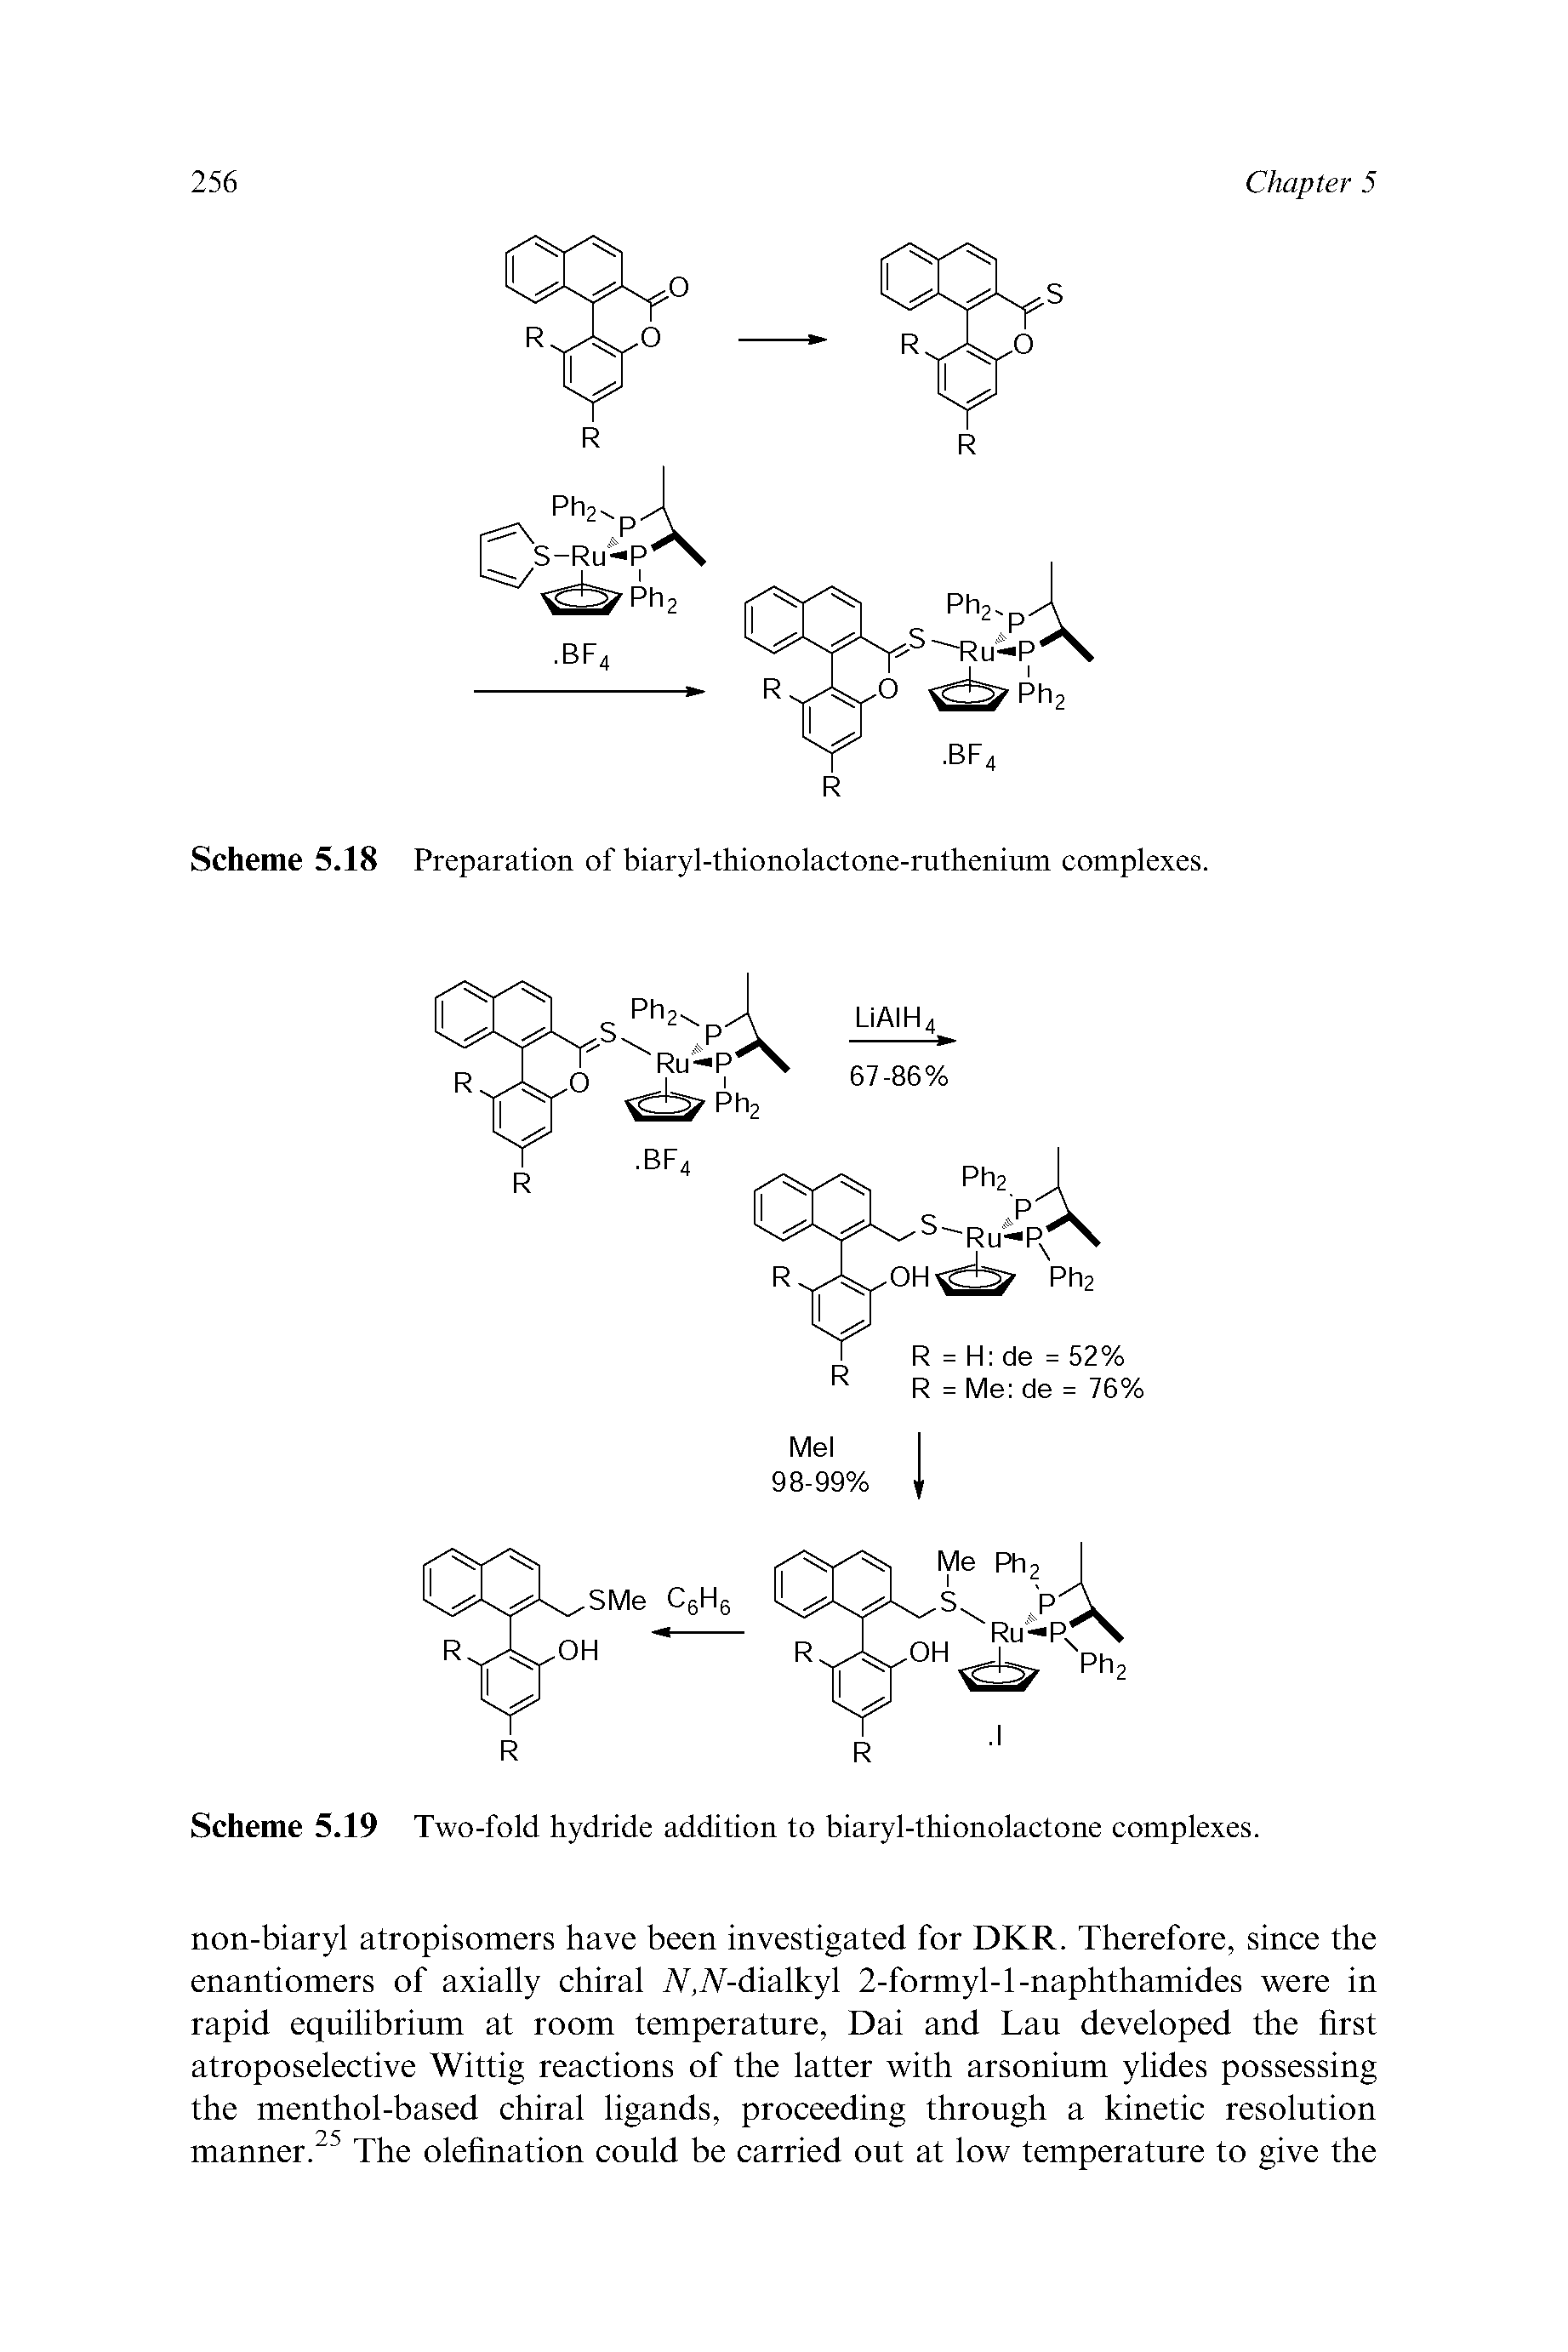 Scheme 5.19 Two-fold hydride addition to biaryl-thionolactone complexes.